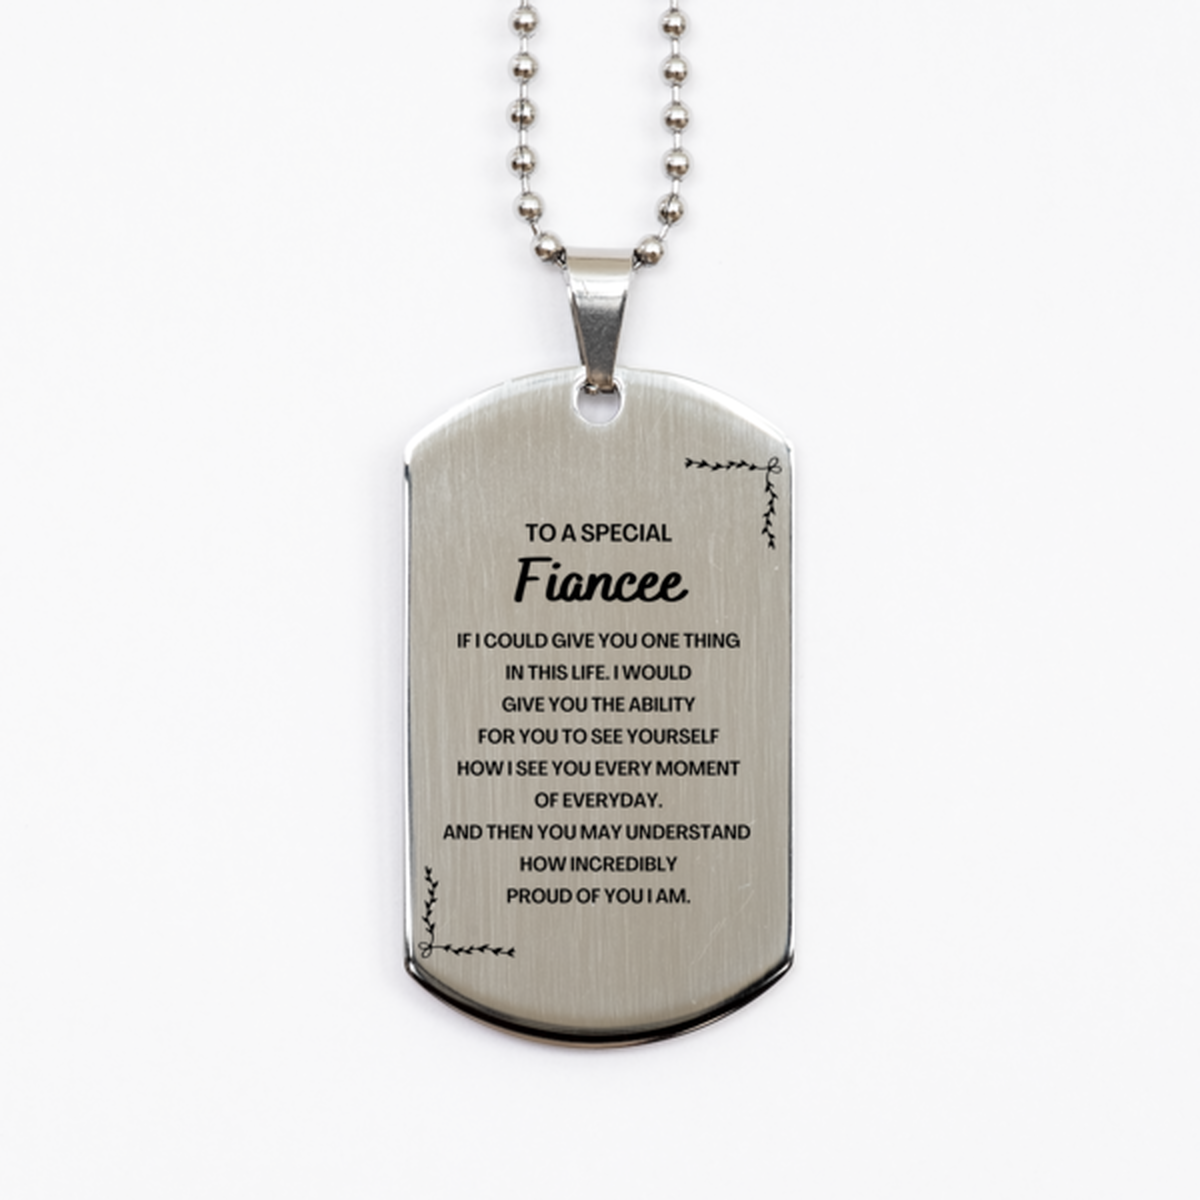 To My Fiancee Silver Dog Tag, Gifts For Fiancee Engraved, Inspirational Gifts for Christmas Birthday, Epic Gifts for Fiancee To A Special Fiancee how incredibly proud of you I am